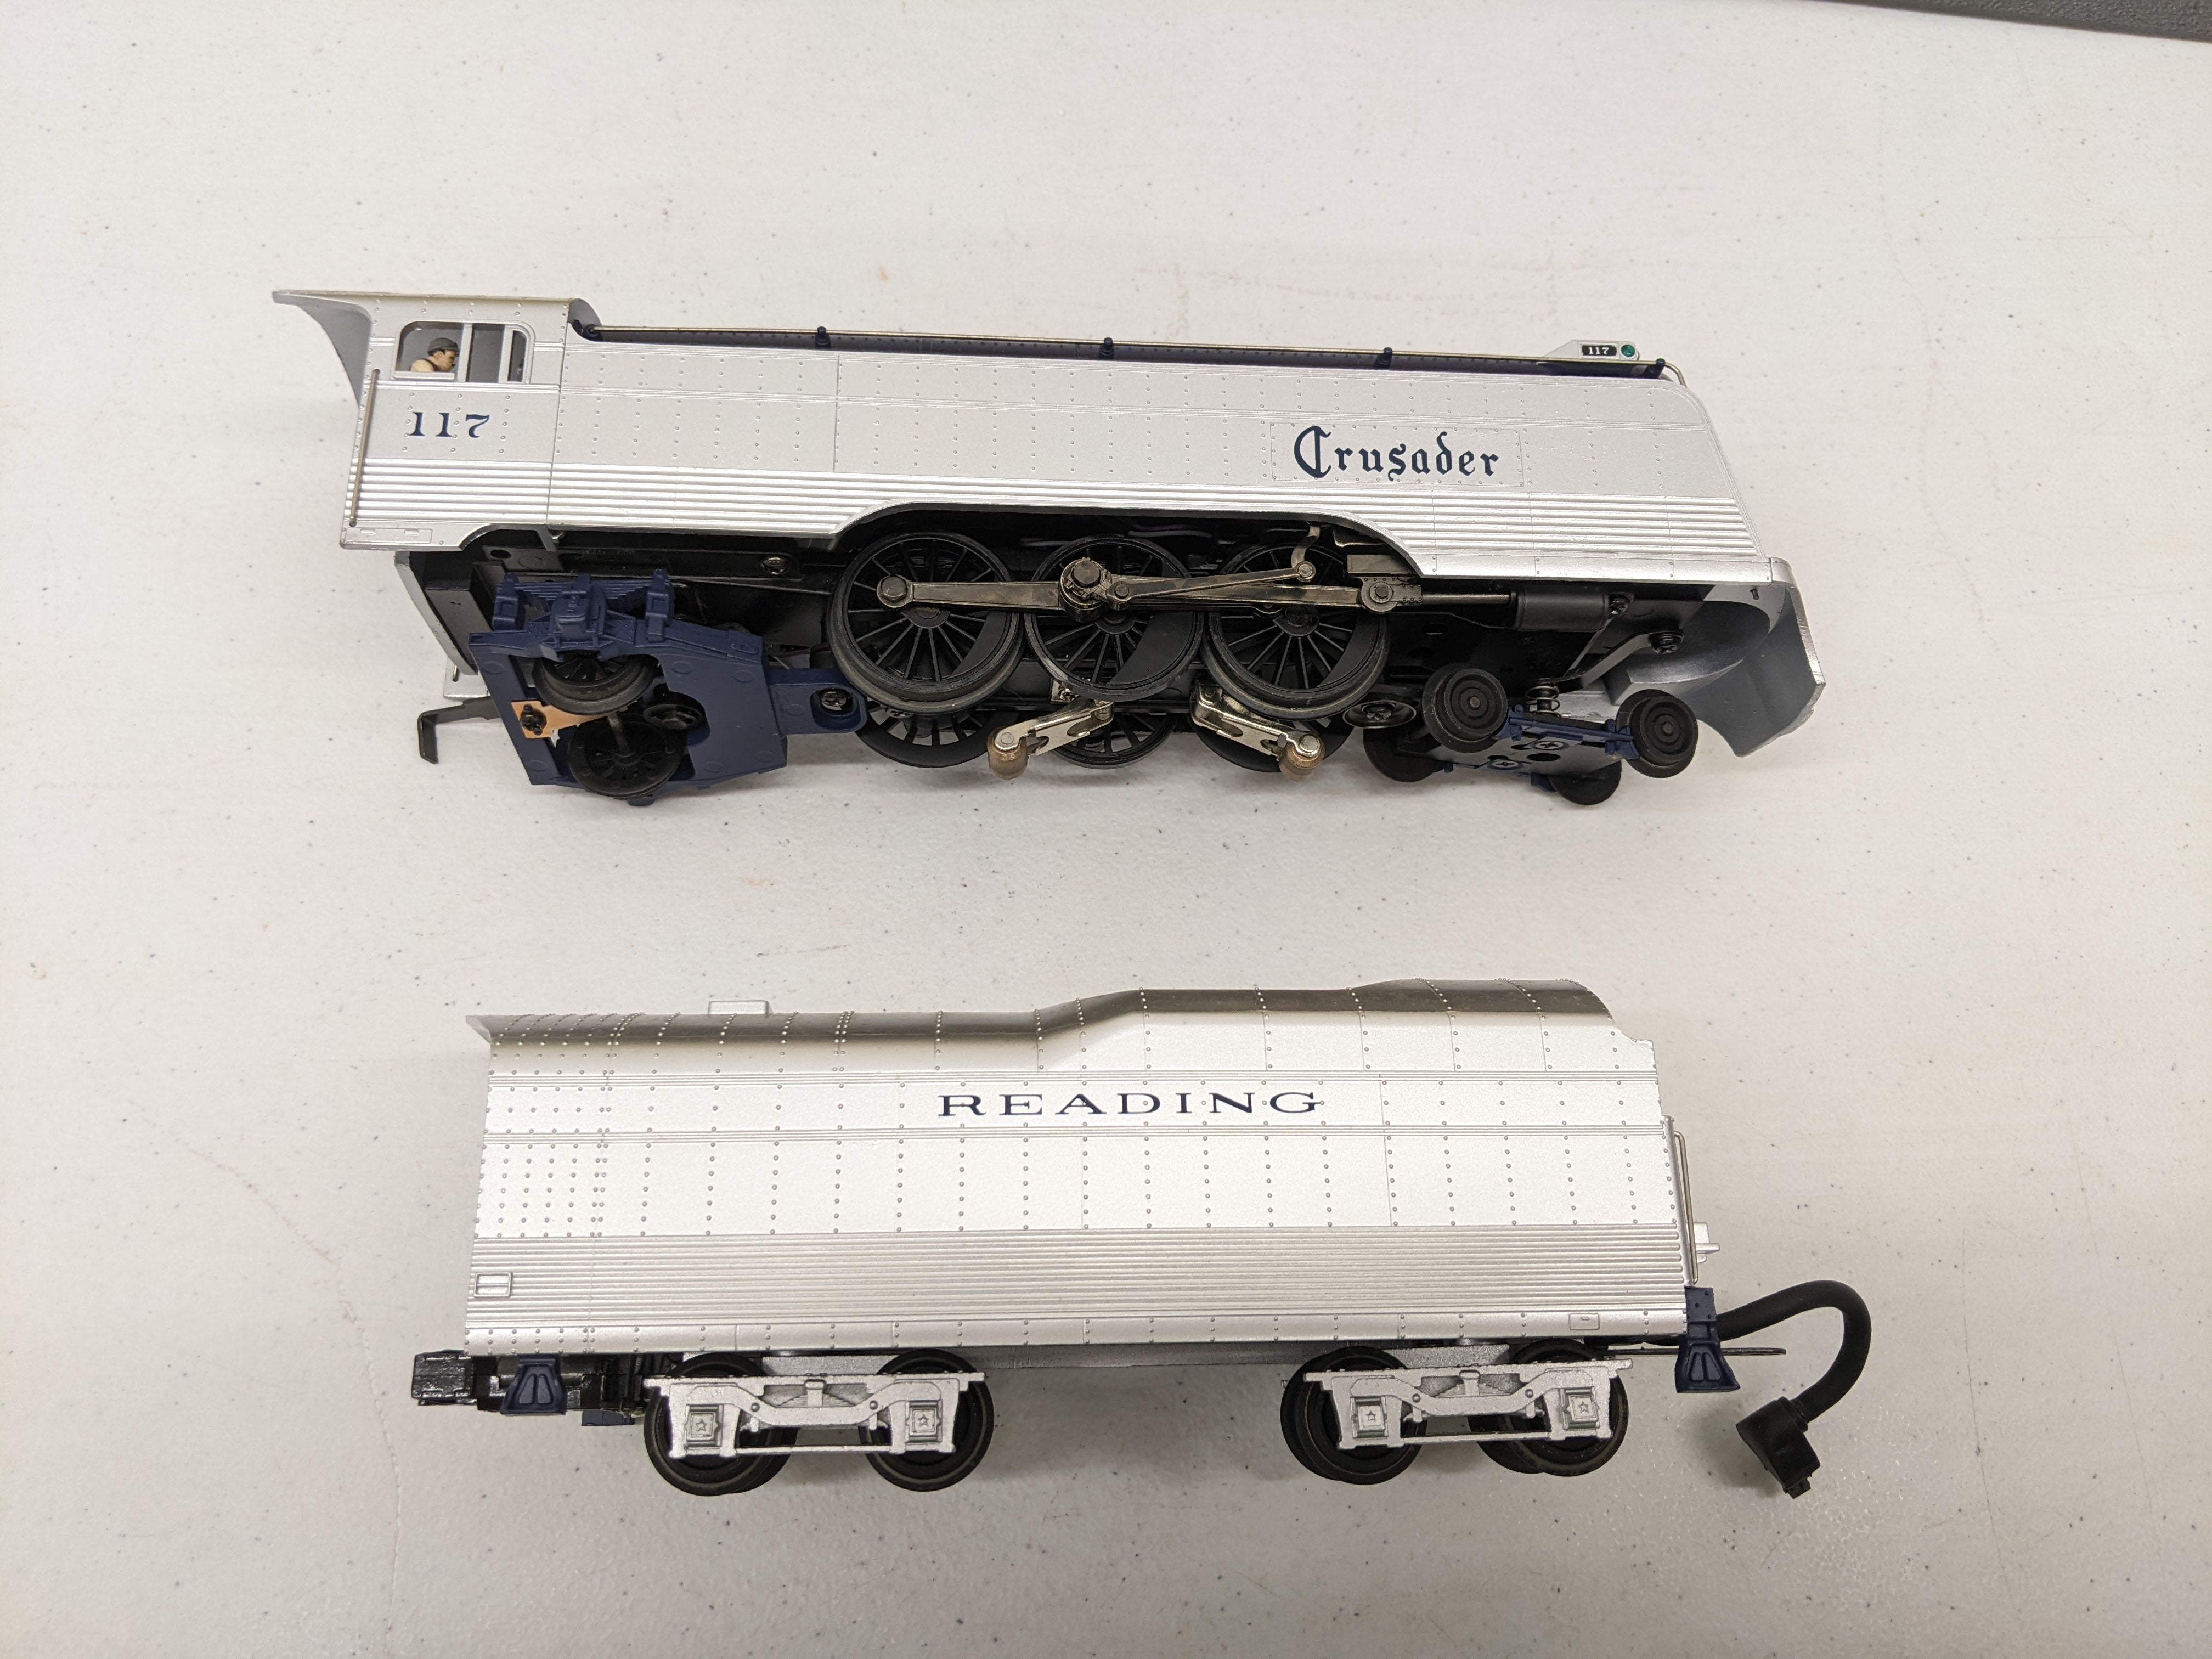 USED MTH Rail King 30-1389-1 O Scale, 4-6-2 Crusader Steam Engine, Reading #117 (Proto-Sound 2.0)